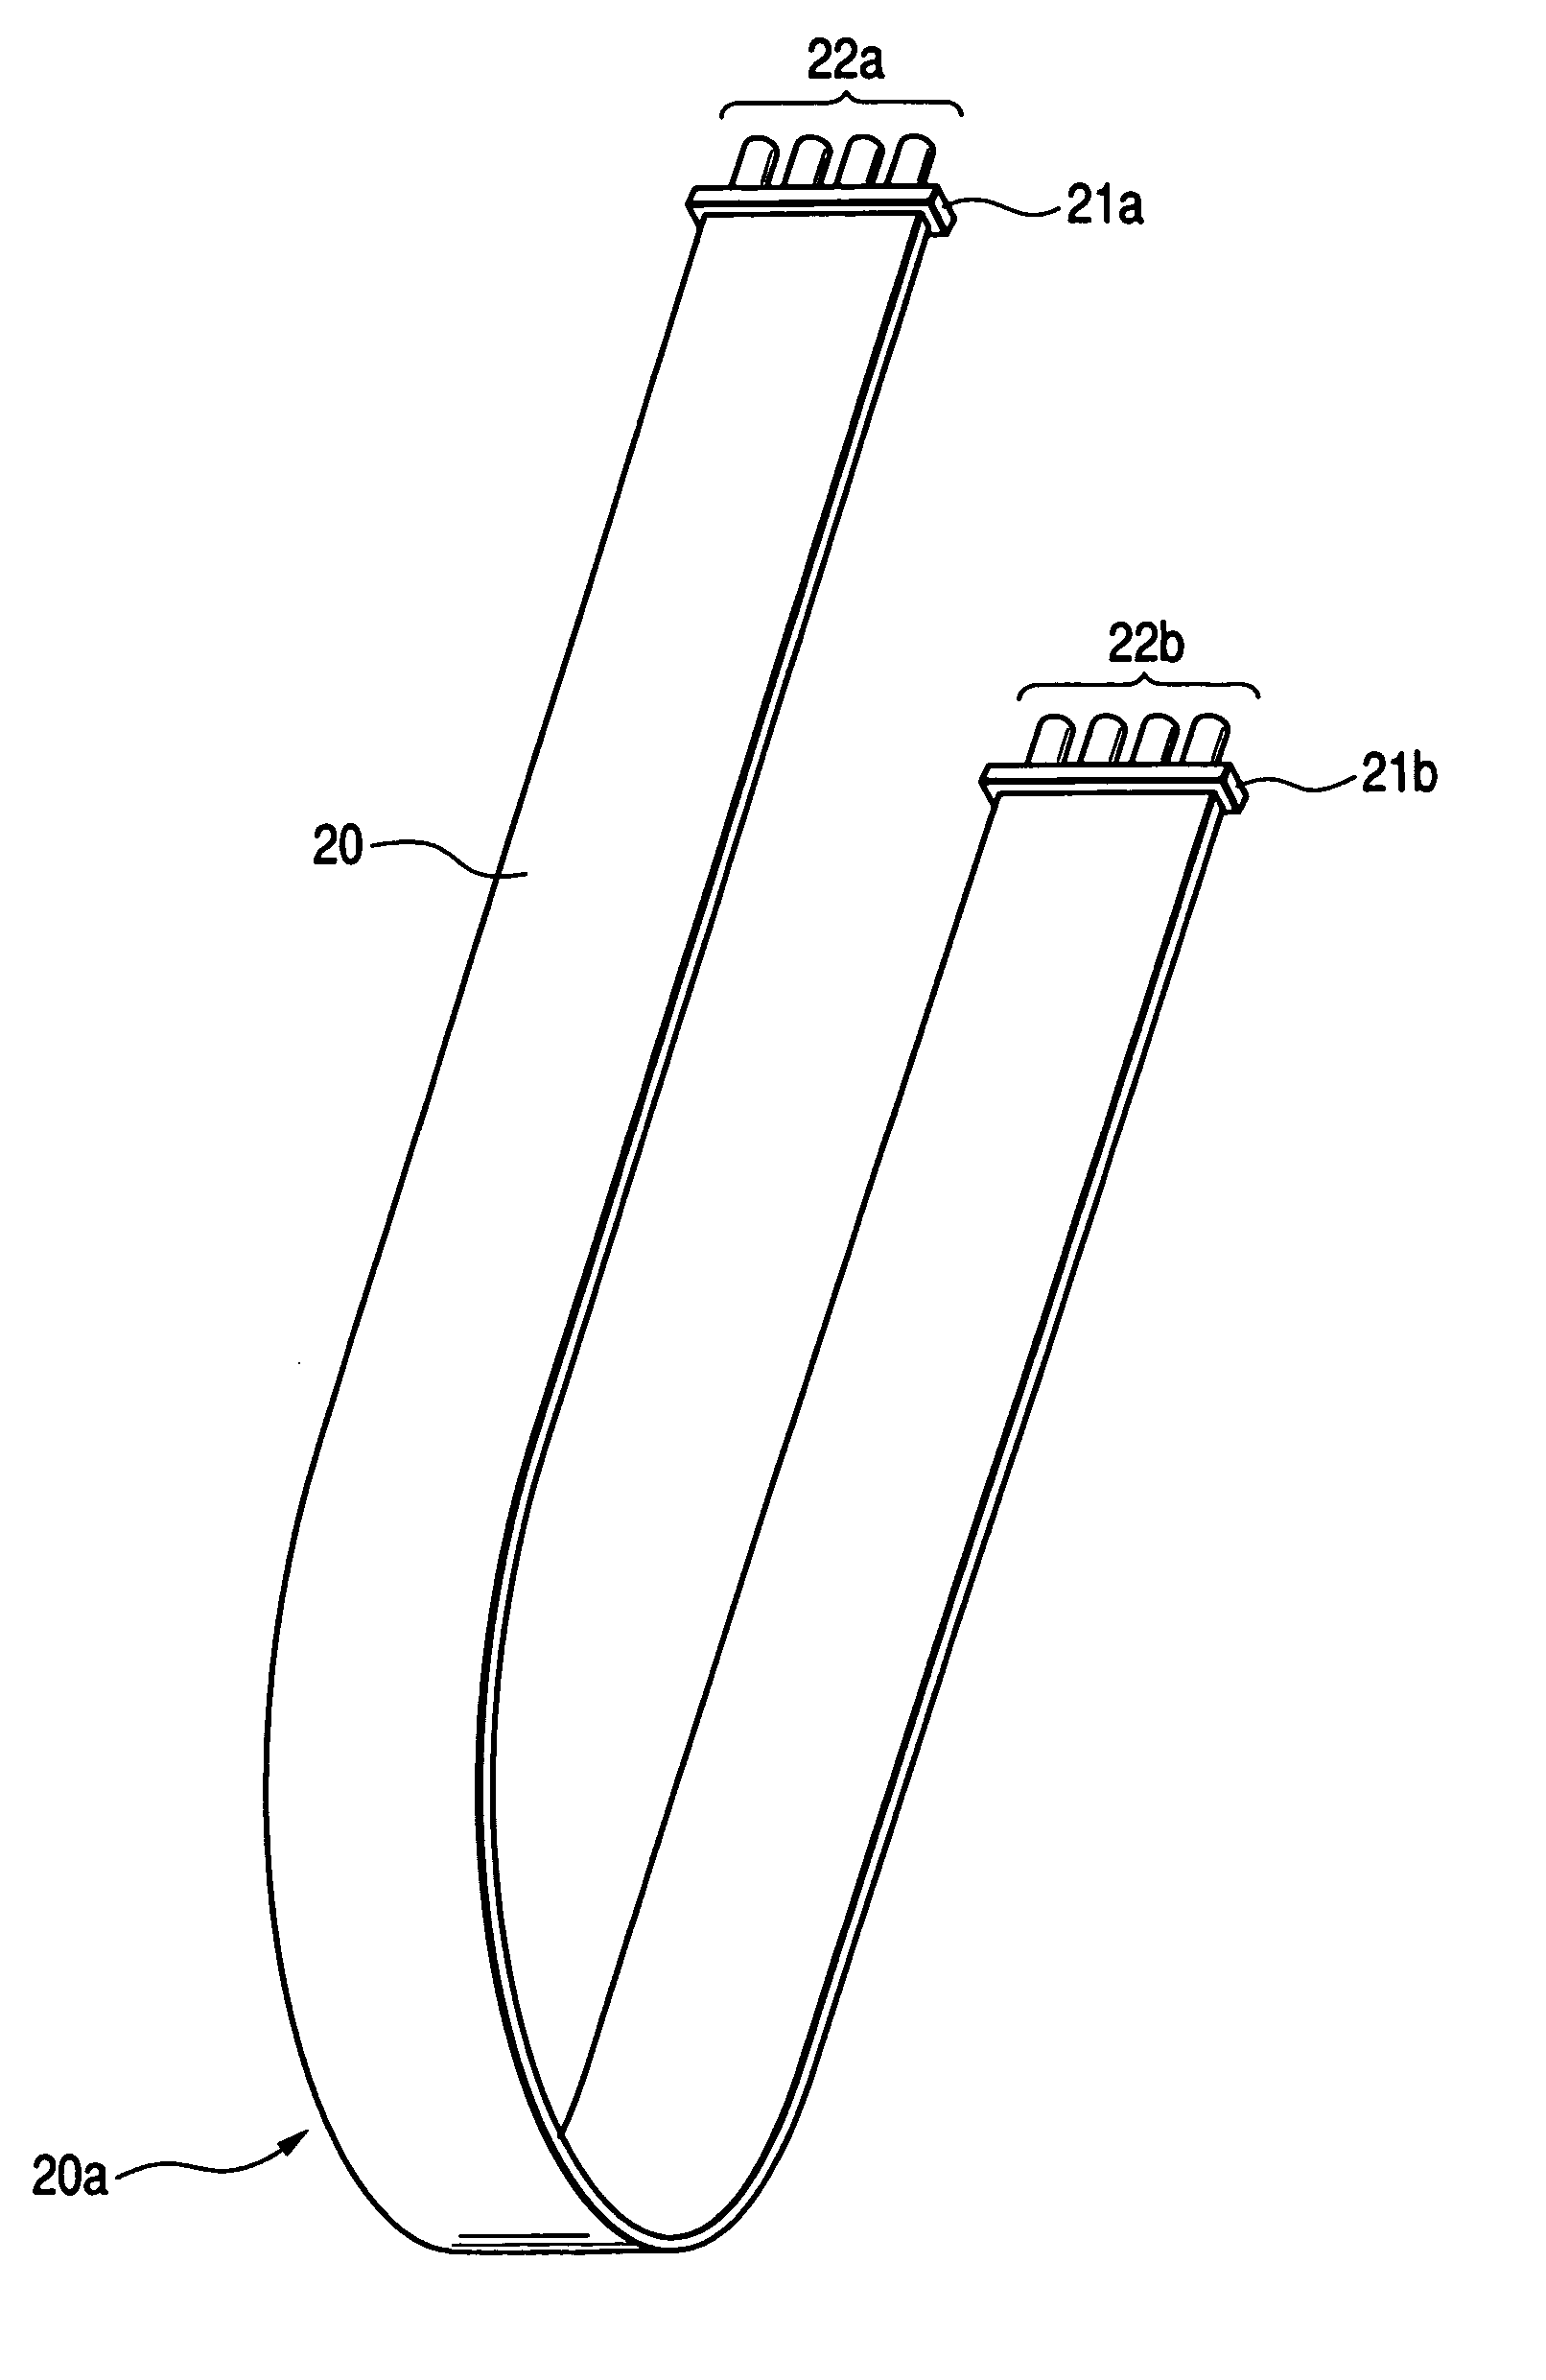 Liquid supplying member, method of manufacturing the same, and liquid ejection apparatus incorporating the same